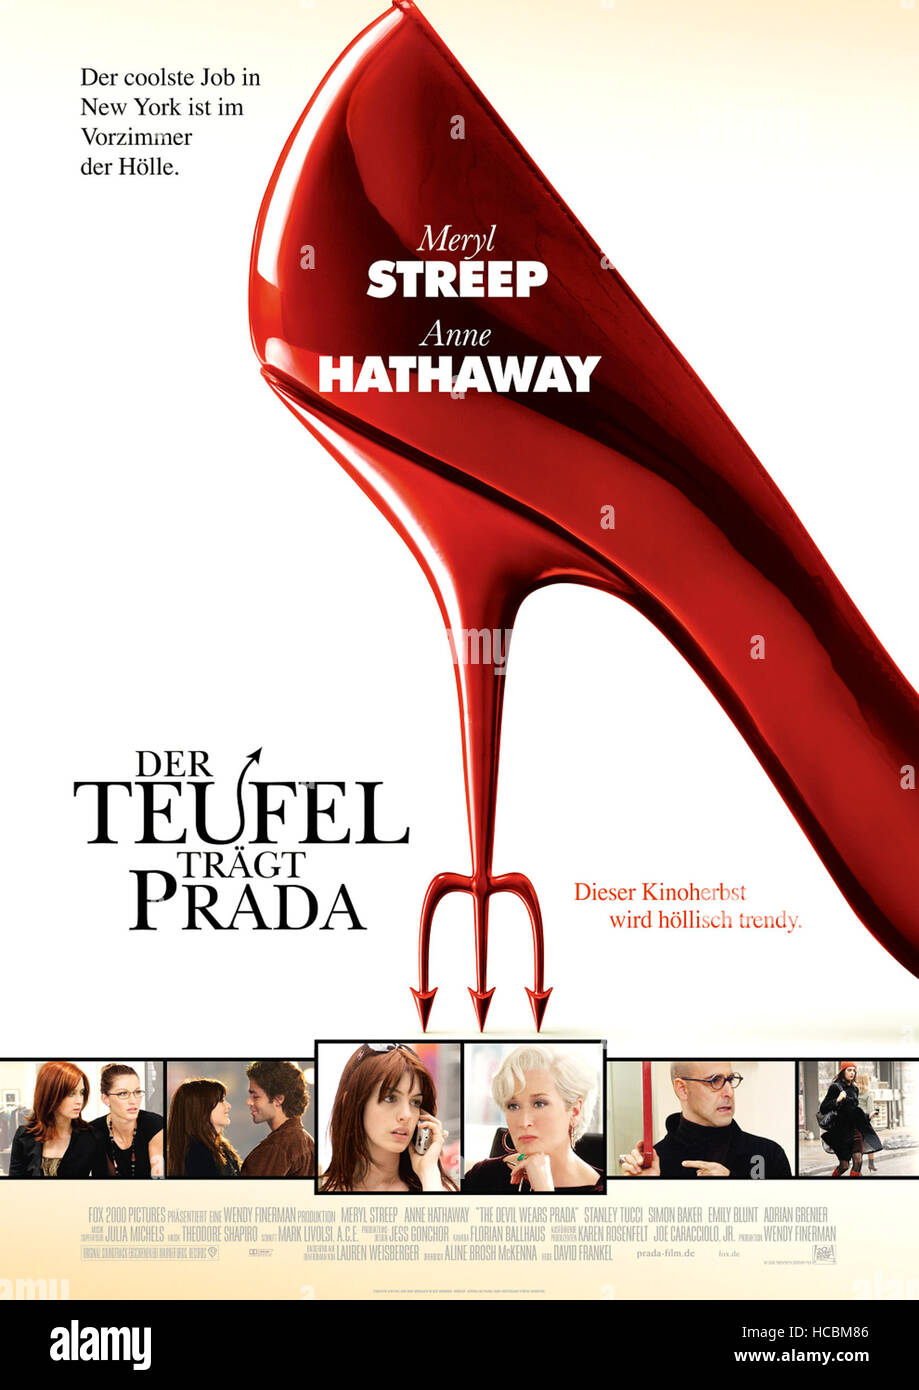 The devil wears prada poster hi-res stock photography and images - Alamy